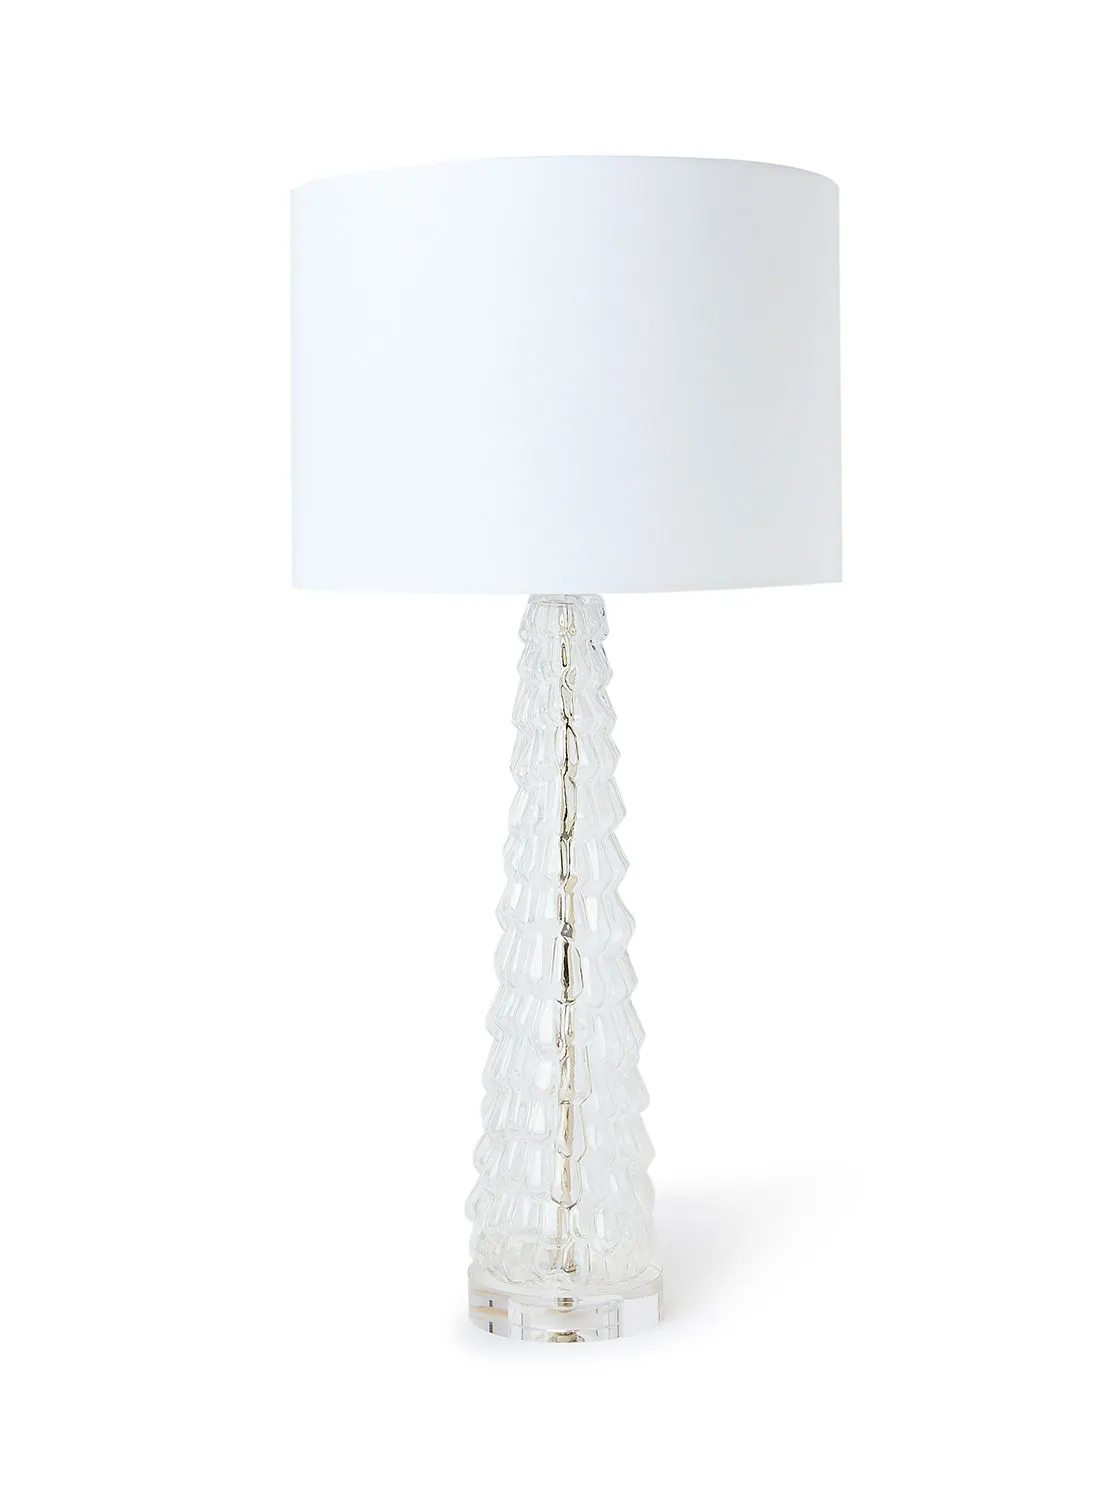 ebb & flow Pillar Crystal Glass Table Lamp | Lampshade Unique Luxury Quality Material For Stylish Homes